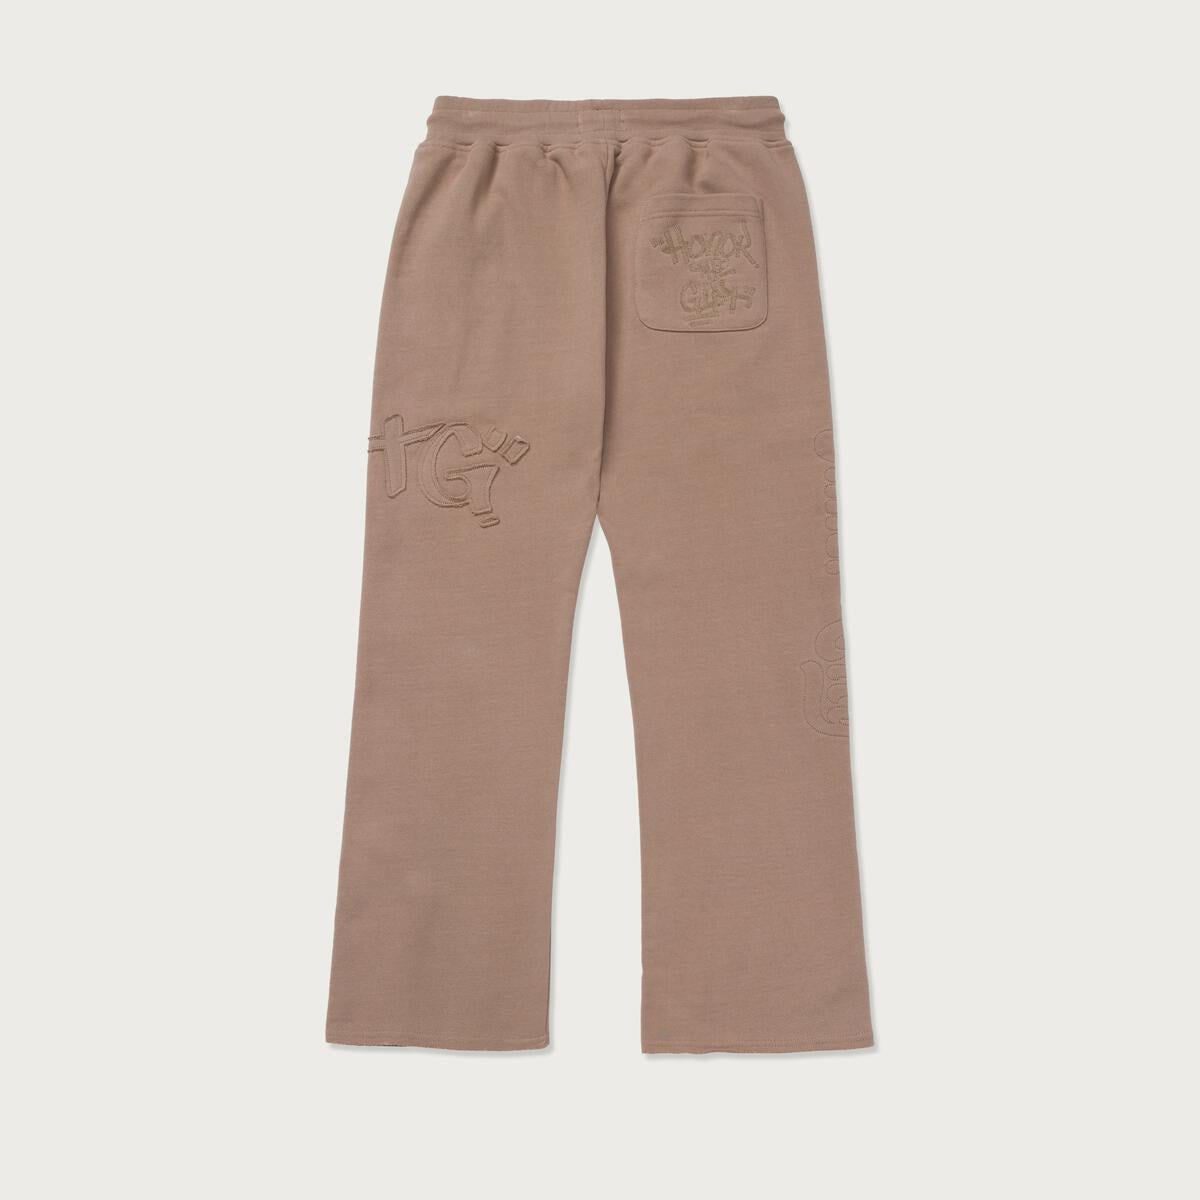 Honor The Gift Script Embroidered Sweats Light Brown